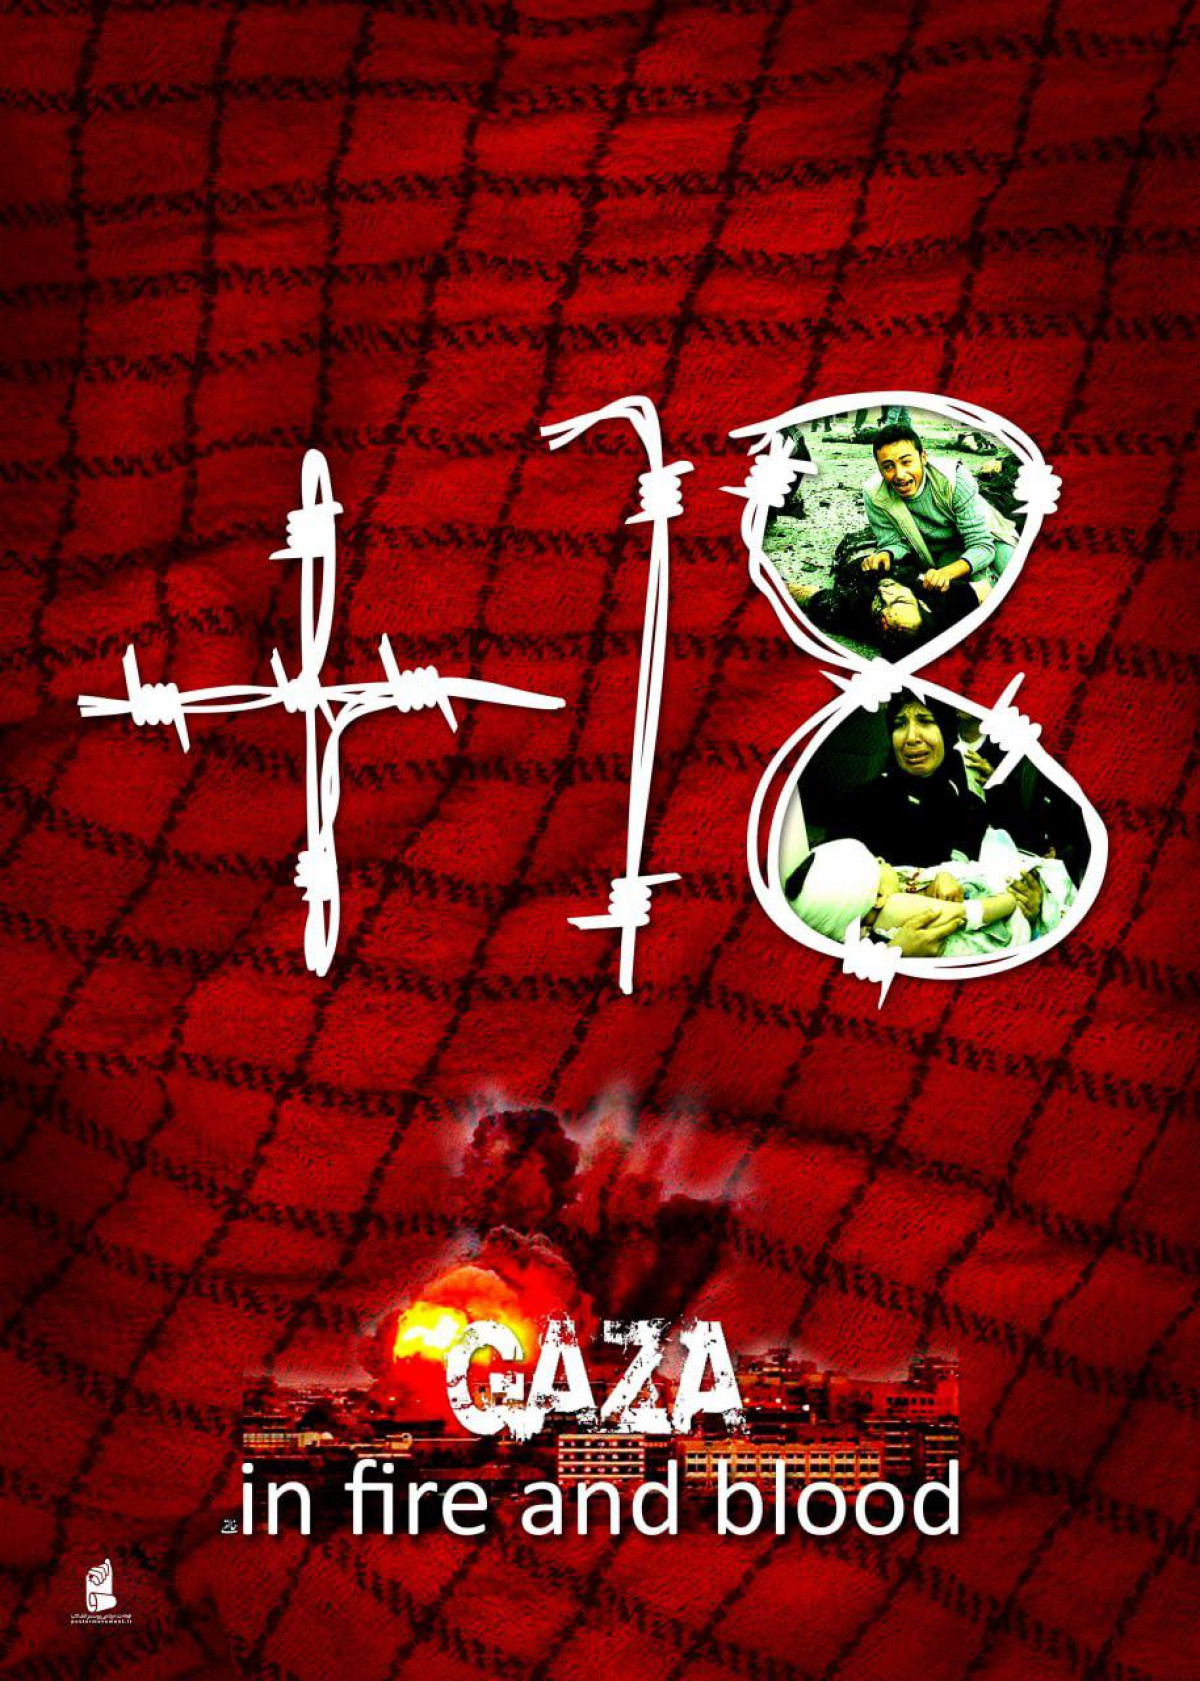 GAZA, in fire and blood